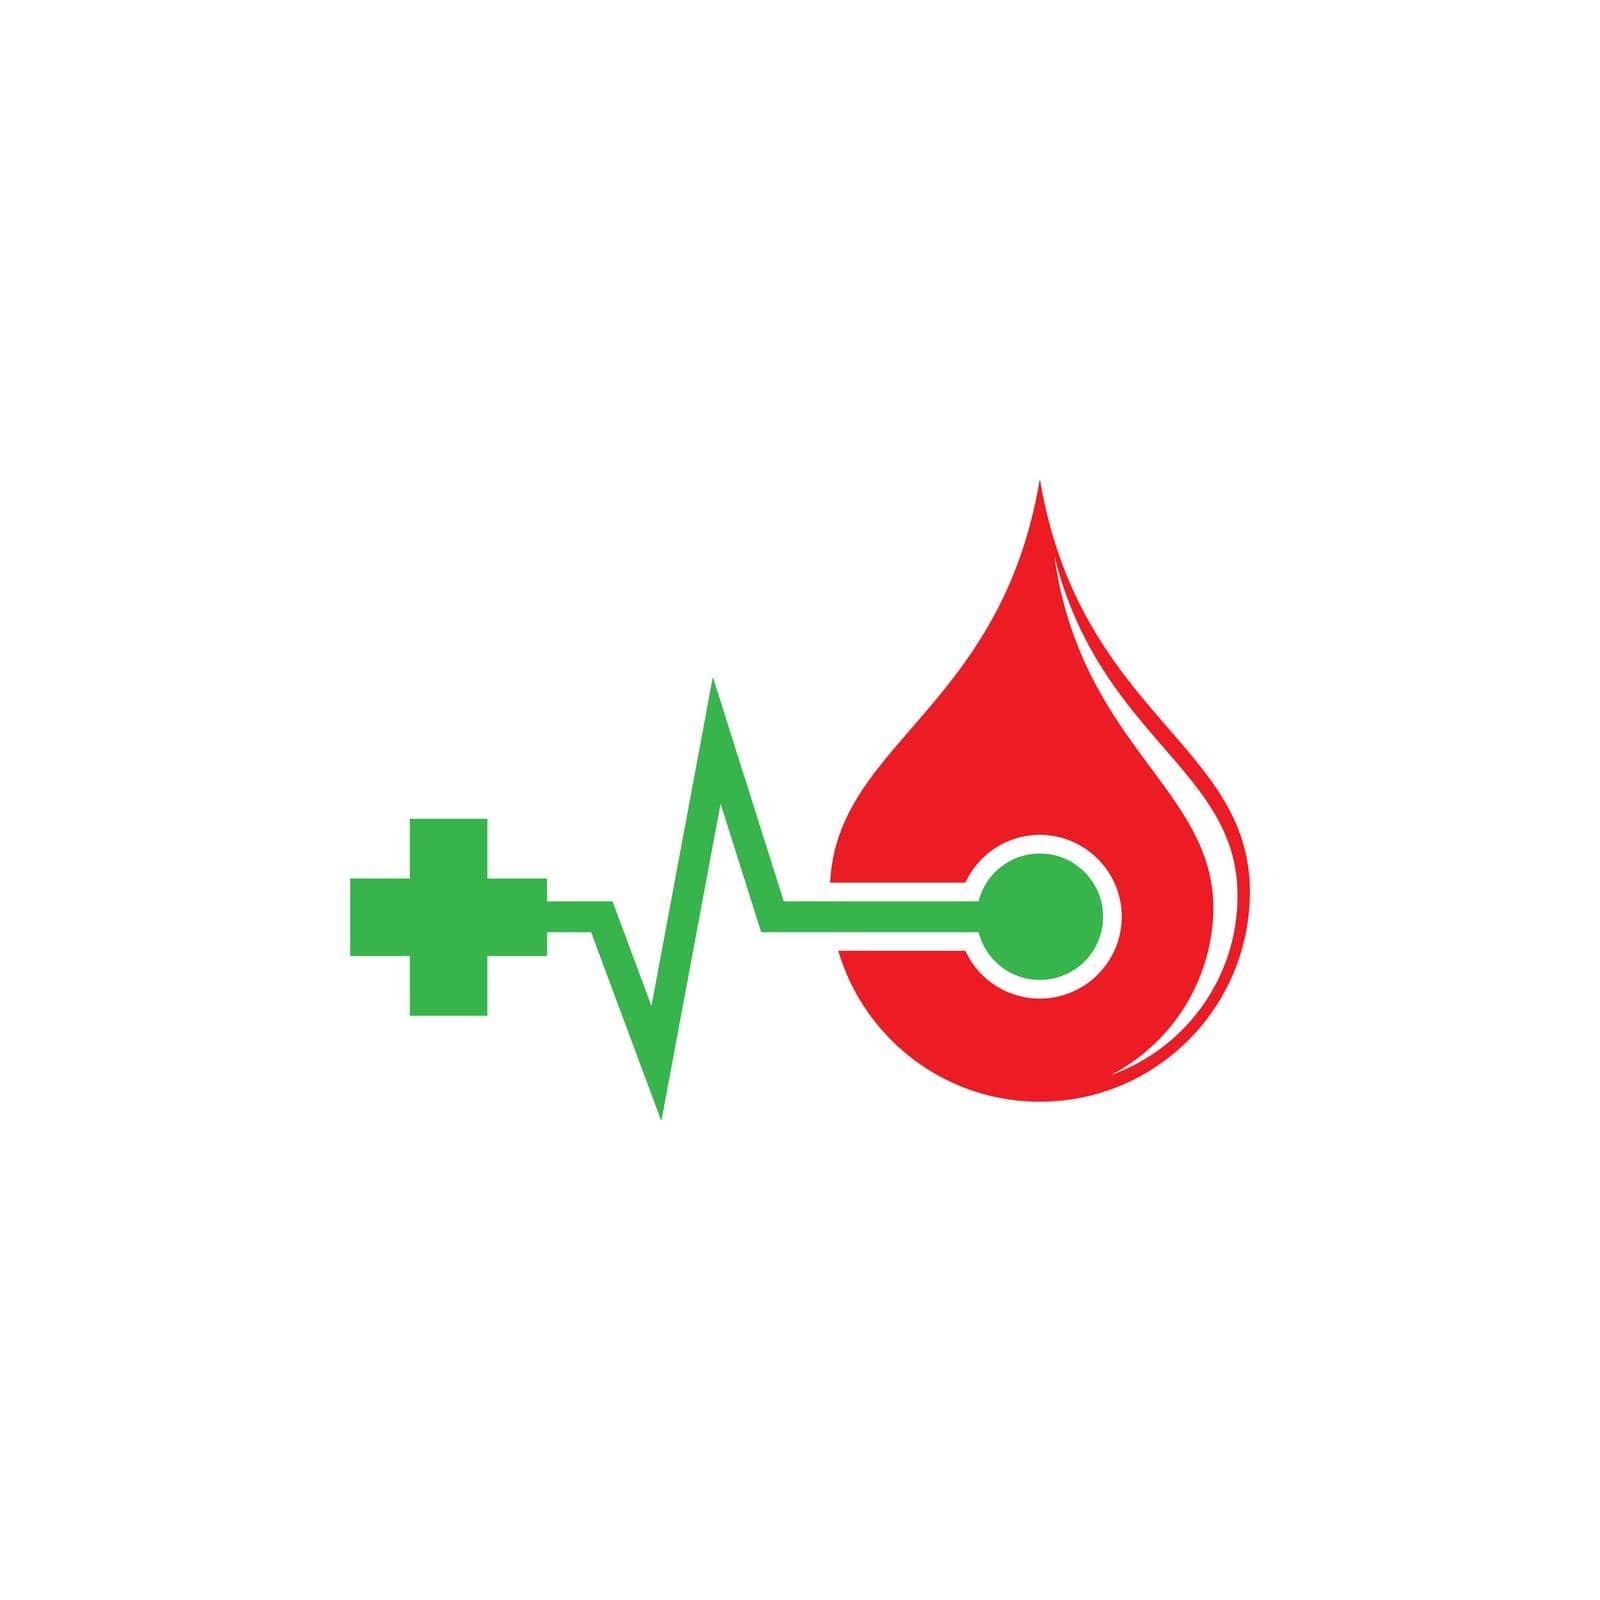 Blood vector icon illustration by Fat17